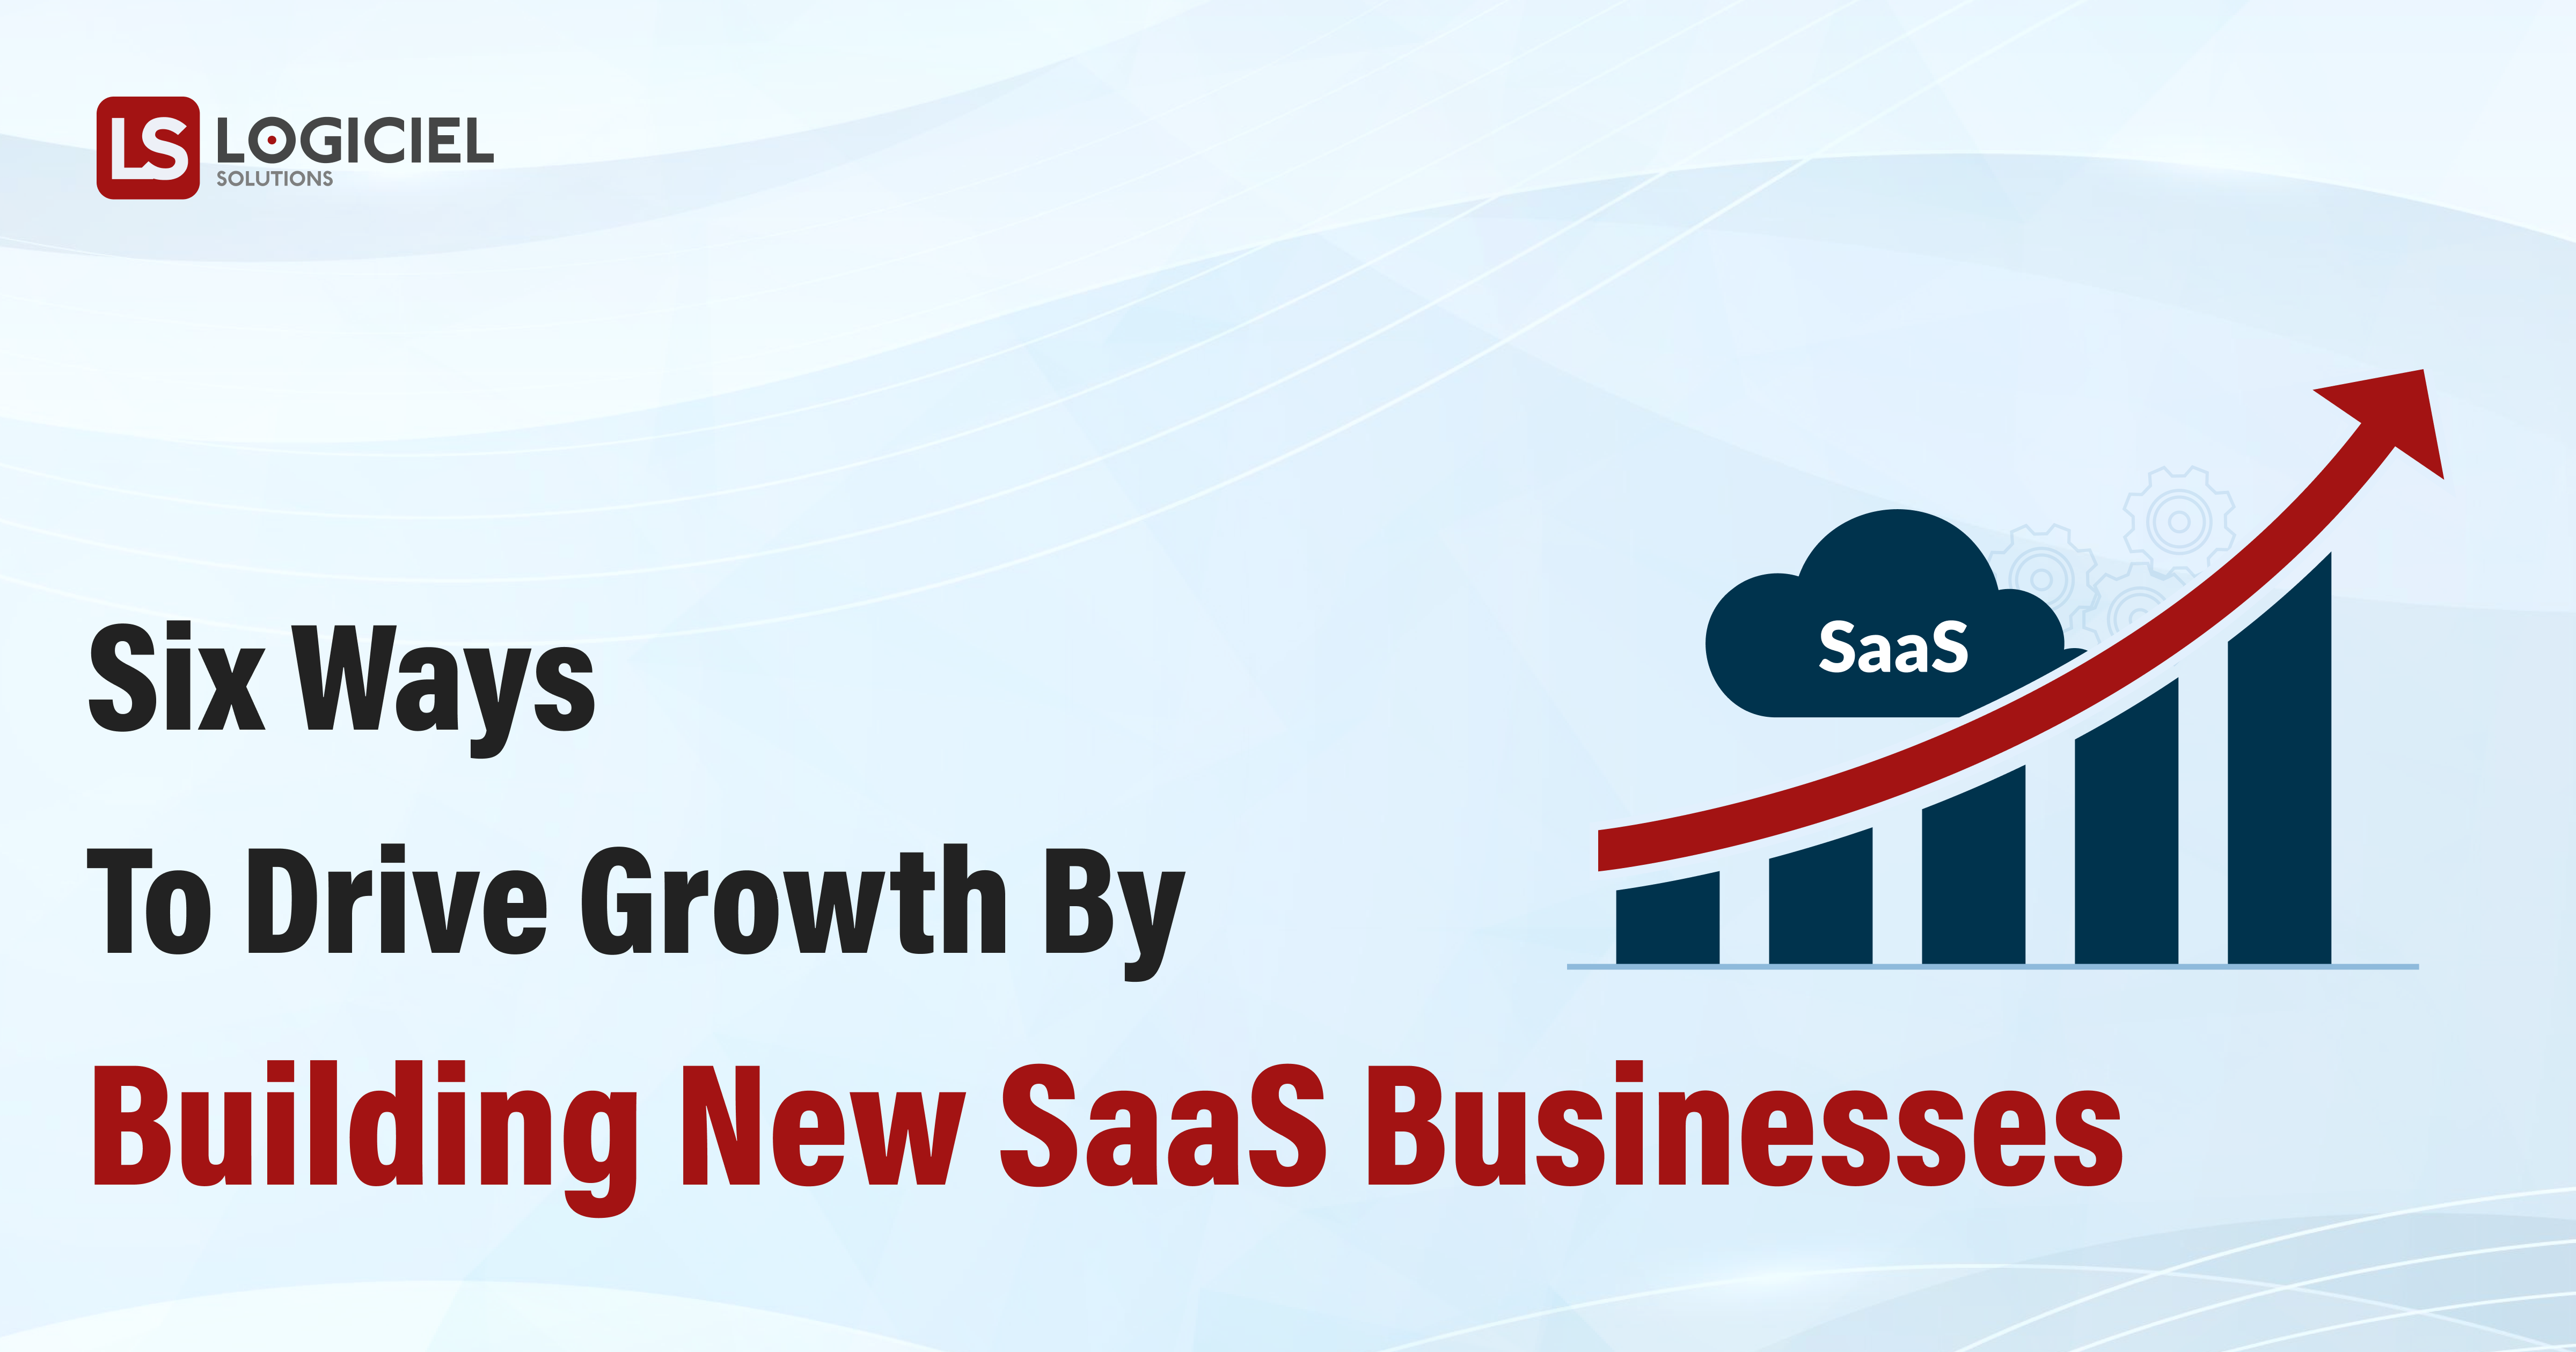 Six ways to drive growth by building new SaaS businesses